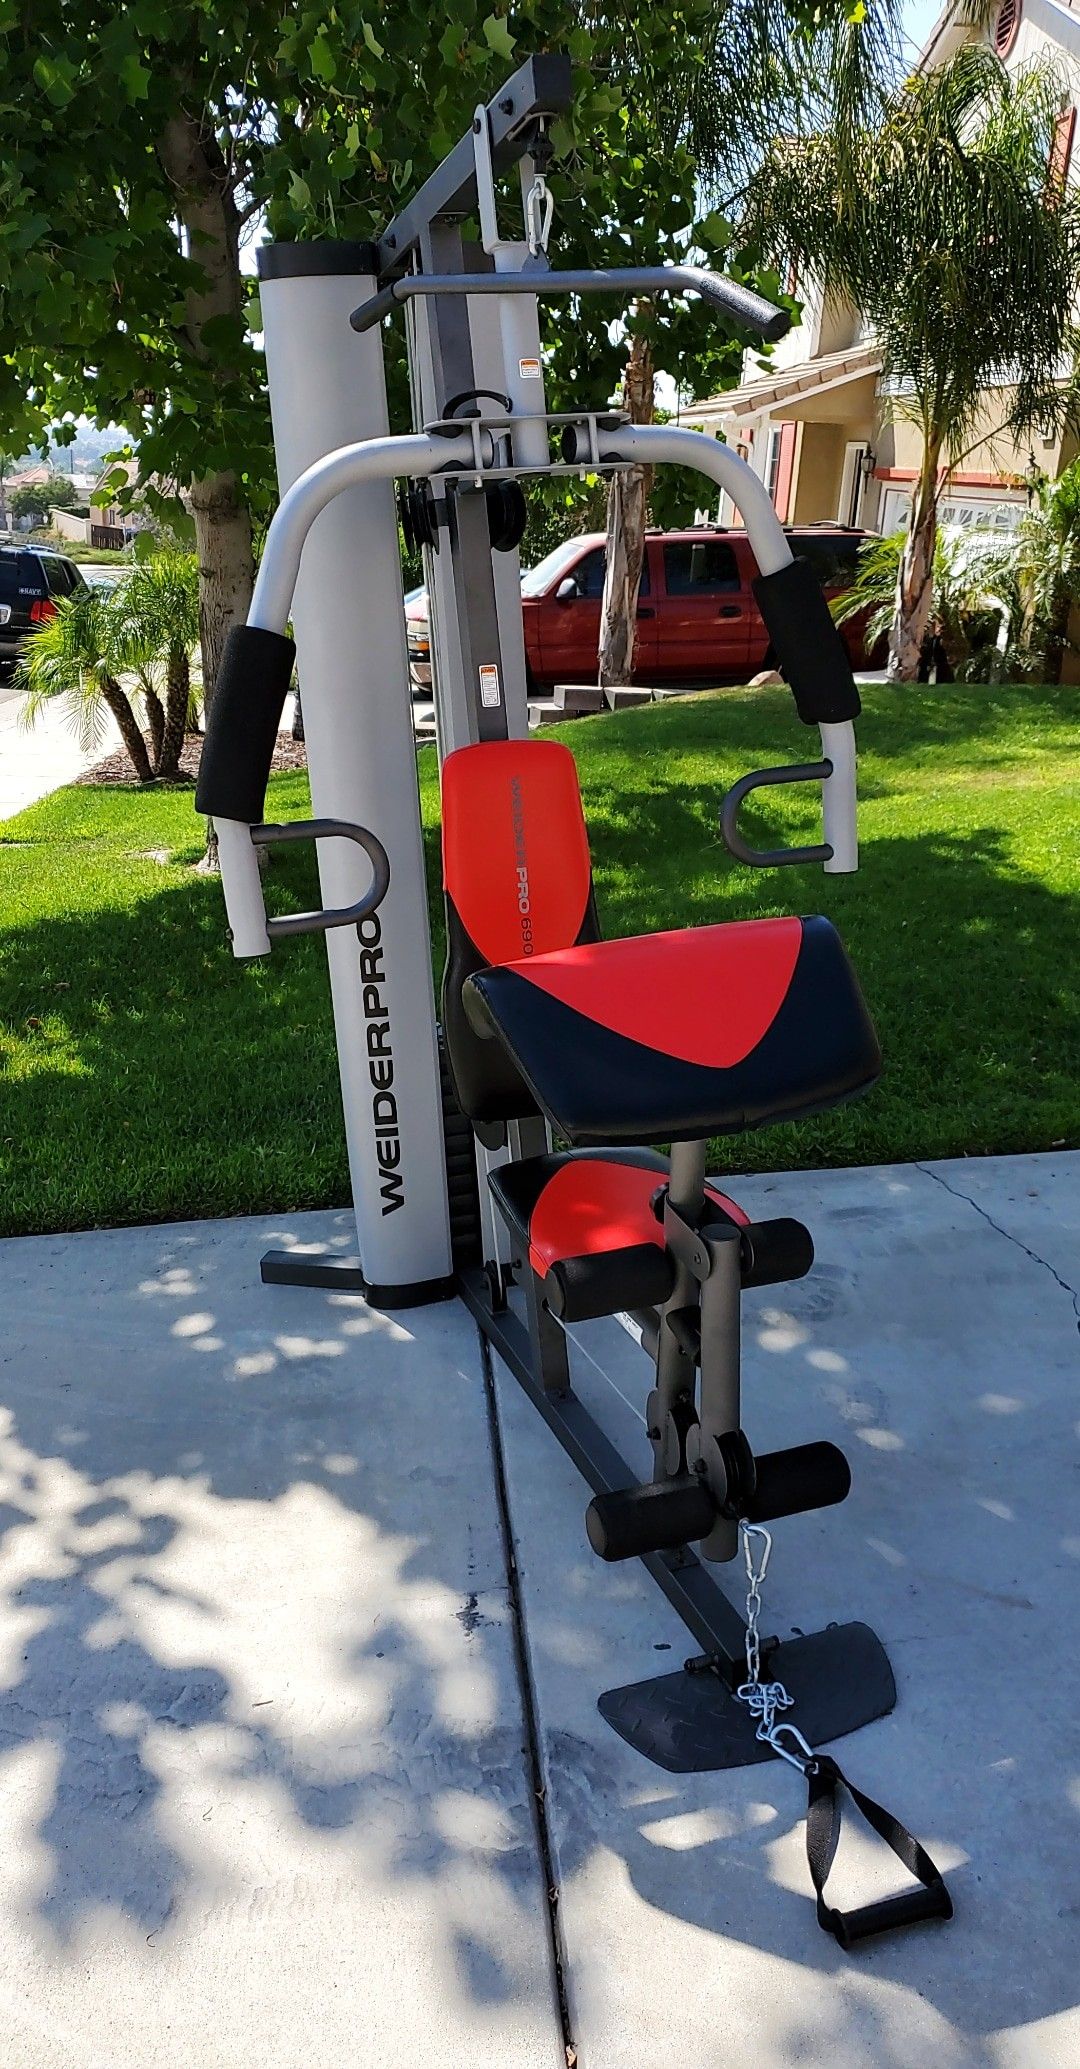 Weider pro 6900 weight machine home gym NEW IMMACULATE!!! $560 firm!!! DELIVERY AVAILABLE